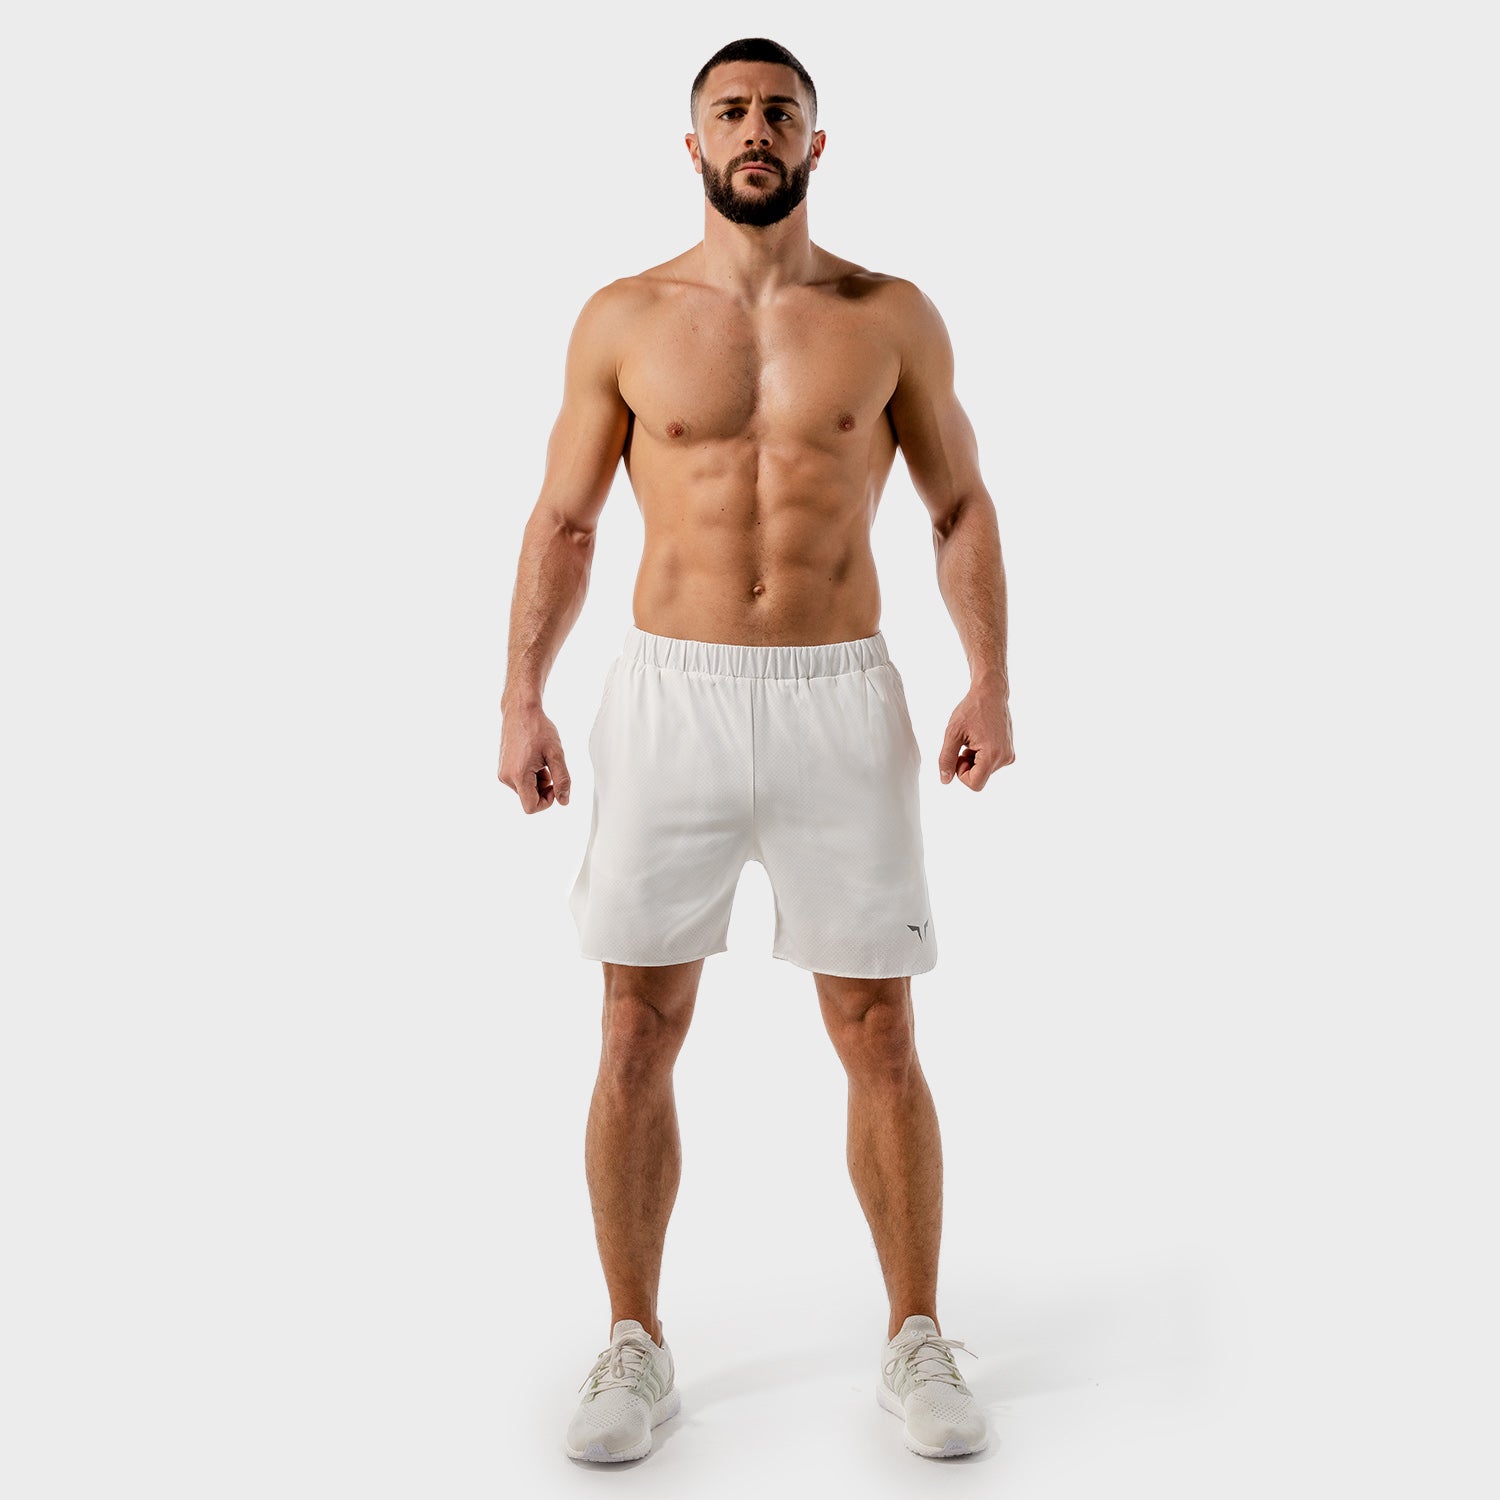 squatwolf-gym-wear-2-in-1-dry-tech-shorts-white-workout-shorts-for-men